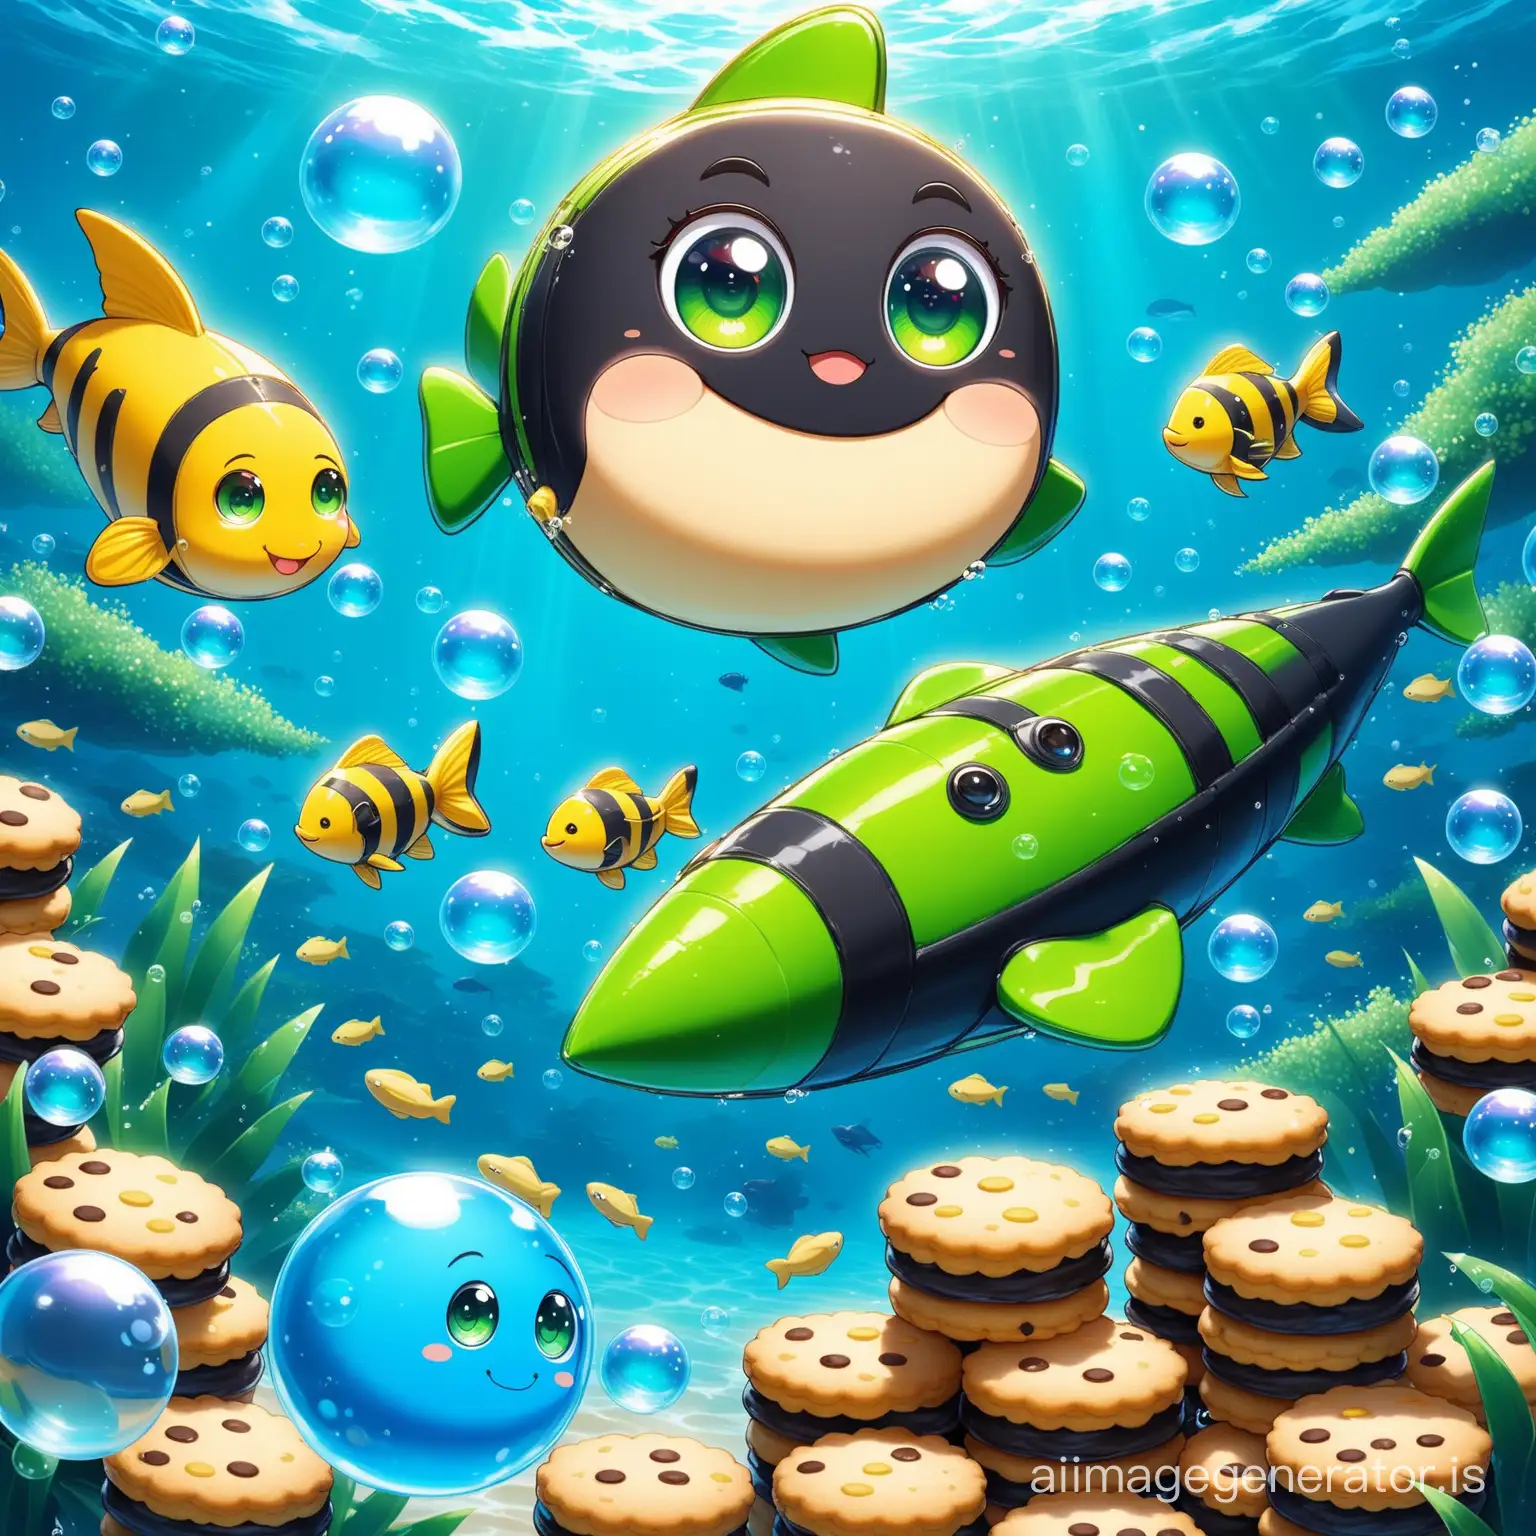 A little black happy cute fish cookie with green eye and smile in sea
I see bananas in see super detail and High Quality
big and blue Bubble and floating cookie are seen everywhere
Details are evident beautifully and with great precision
I see a green rocket in background